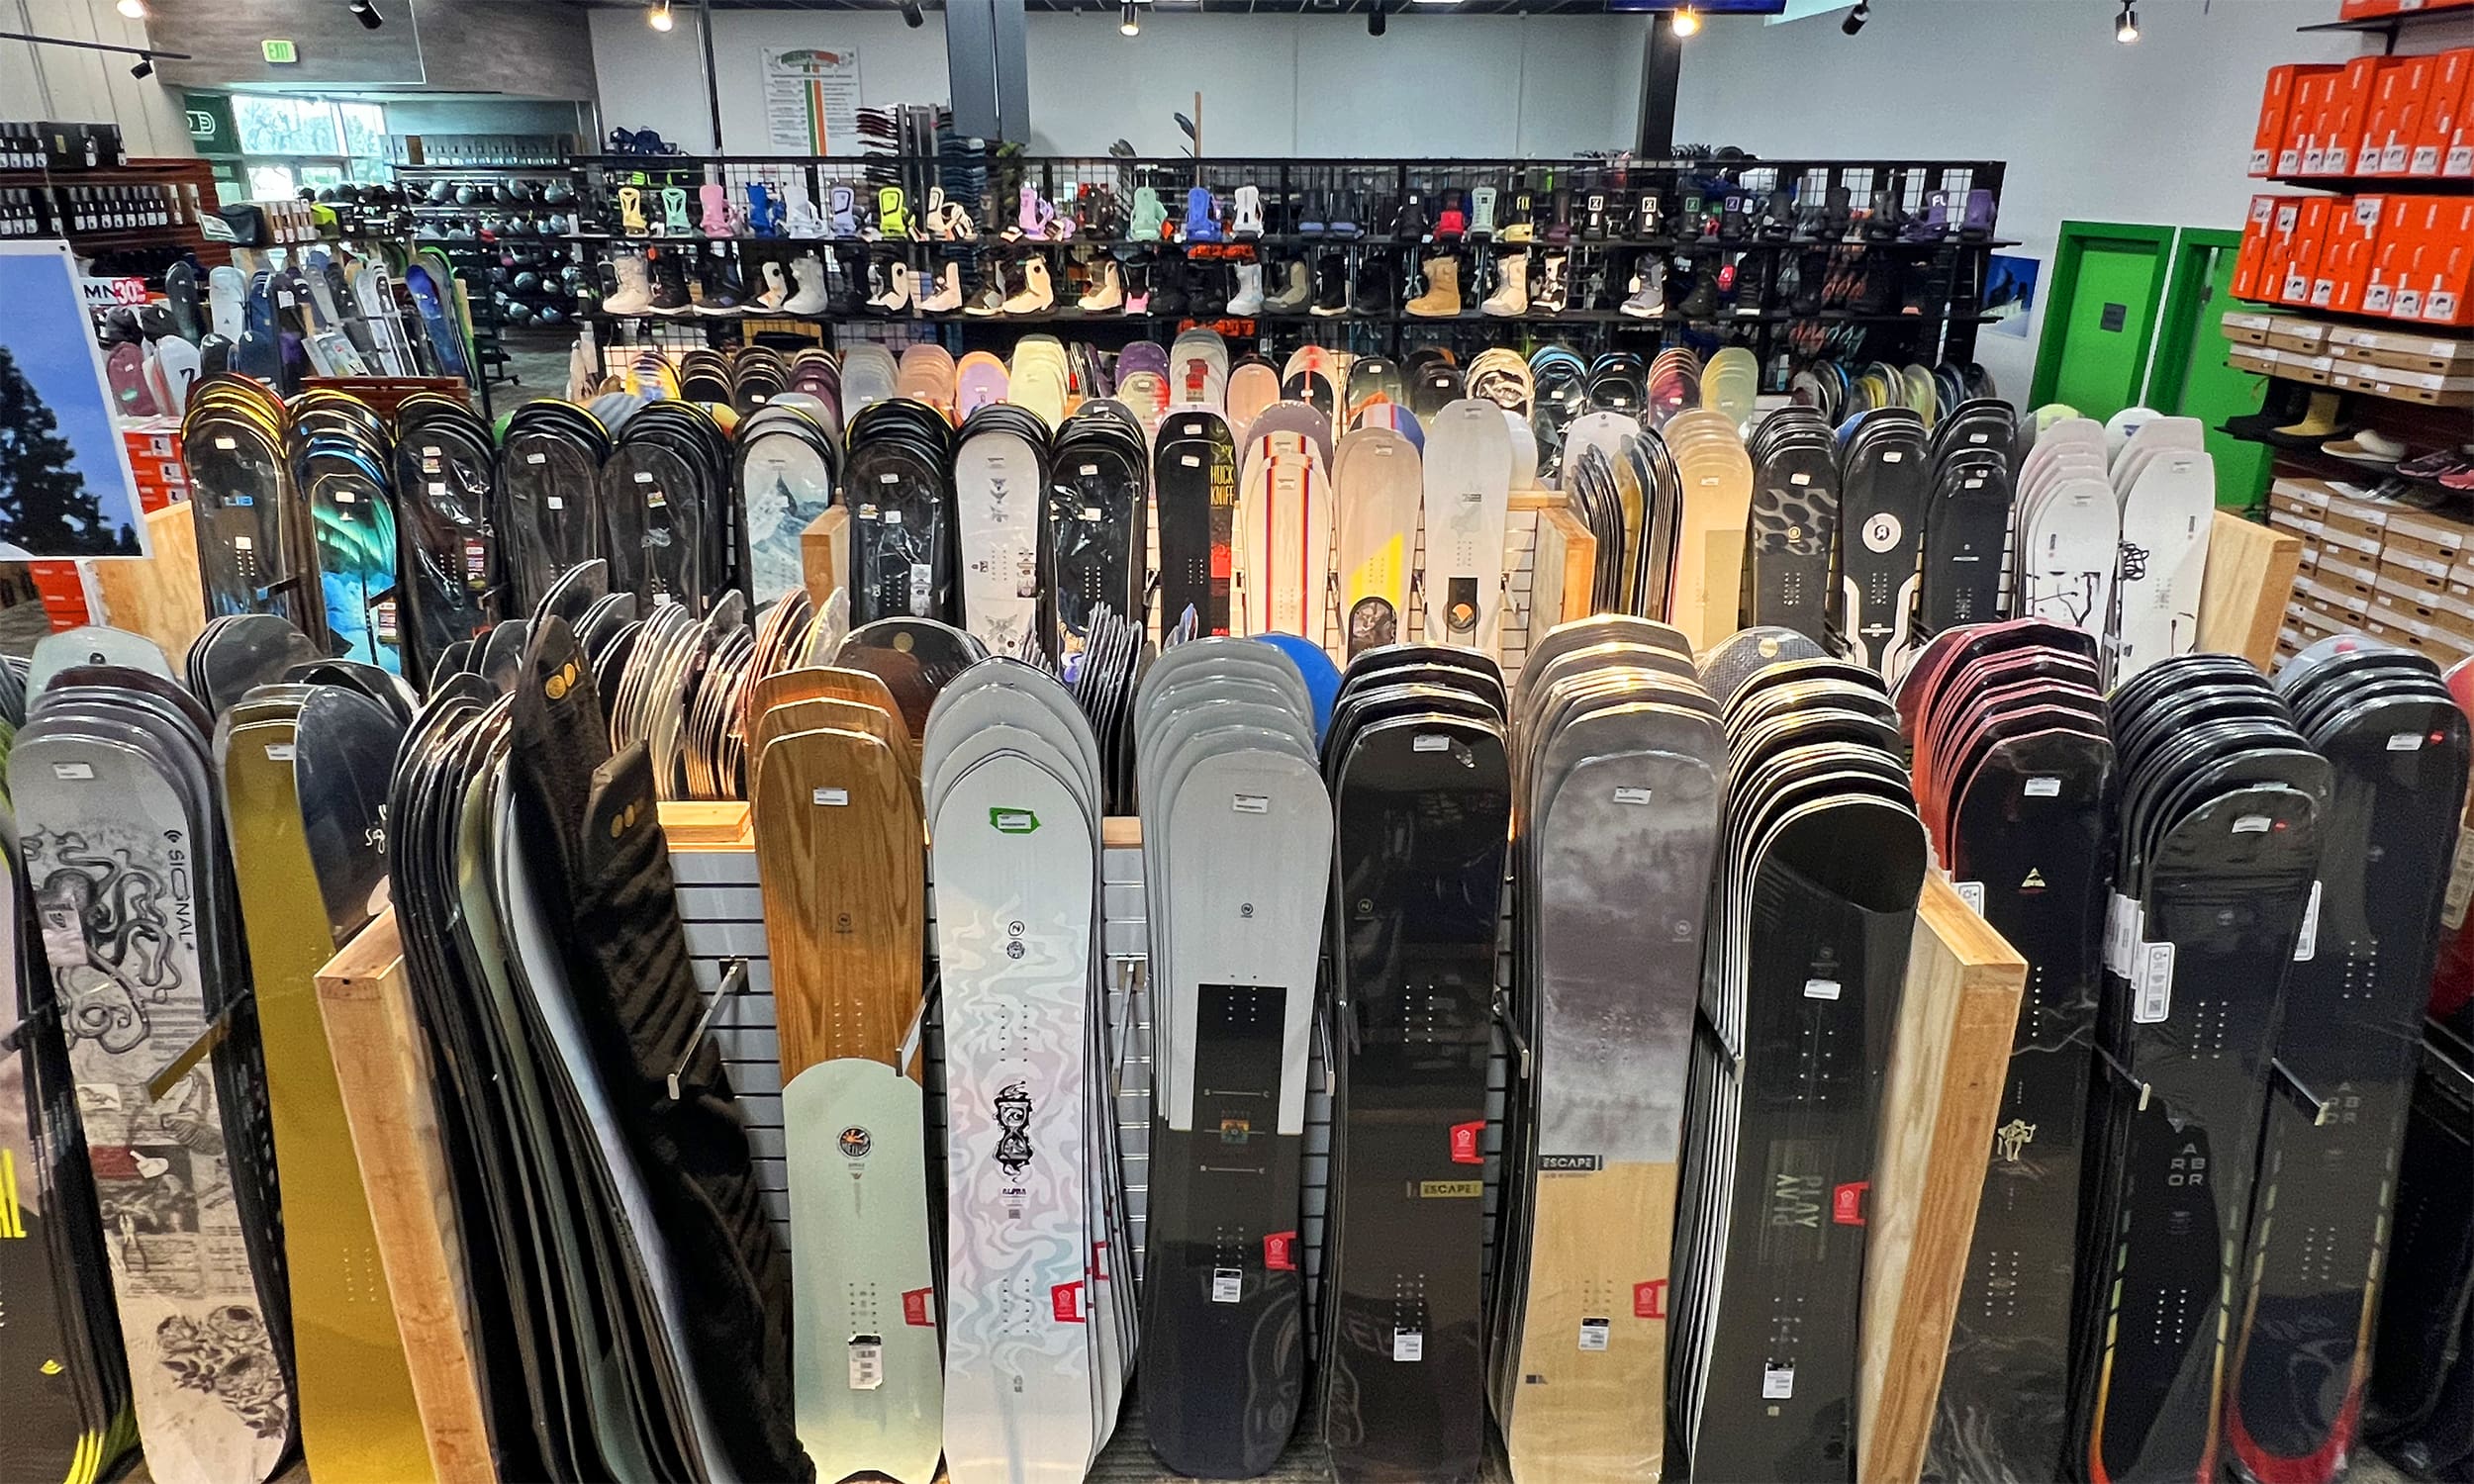 A room filled with lots of skateboards and racks.